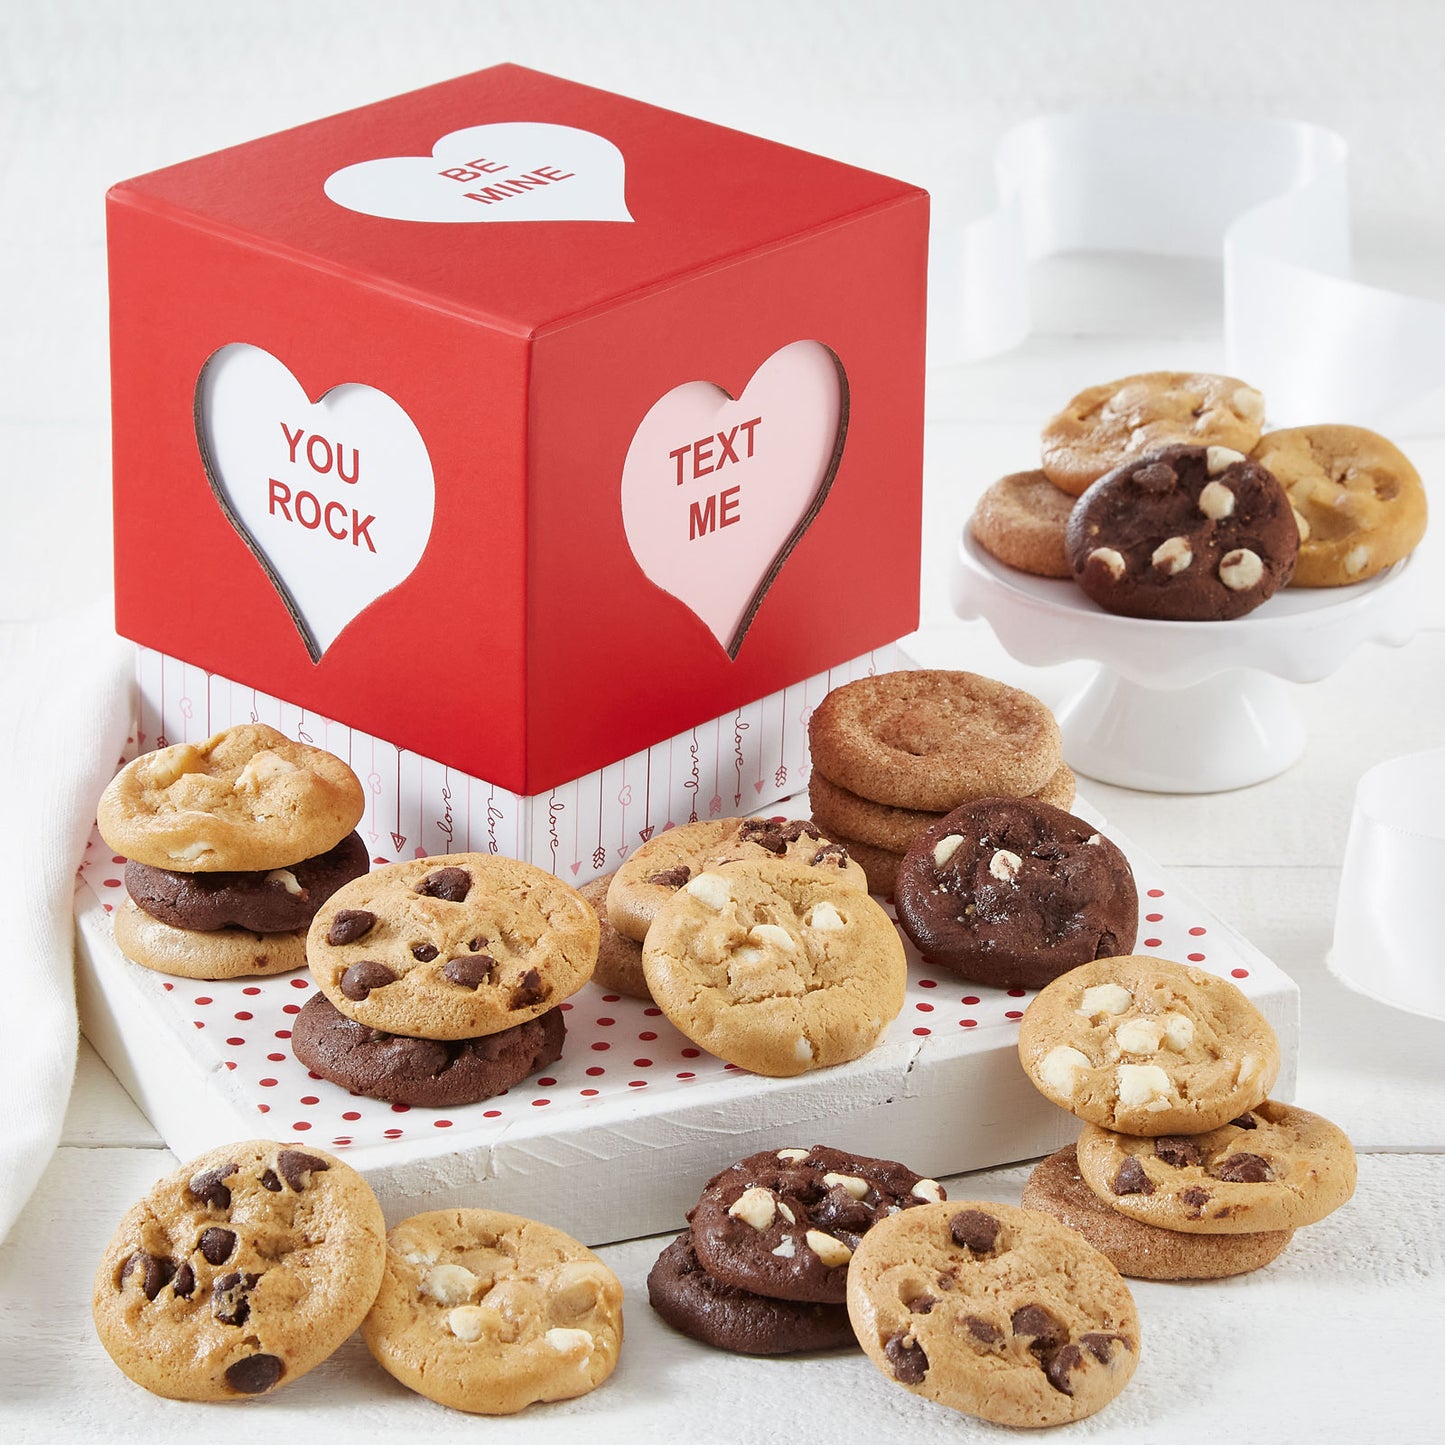 Red cookie box covered in heart messages